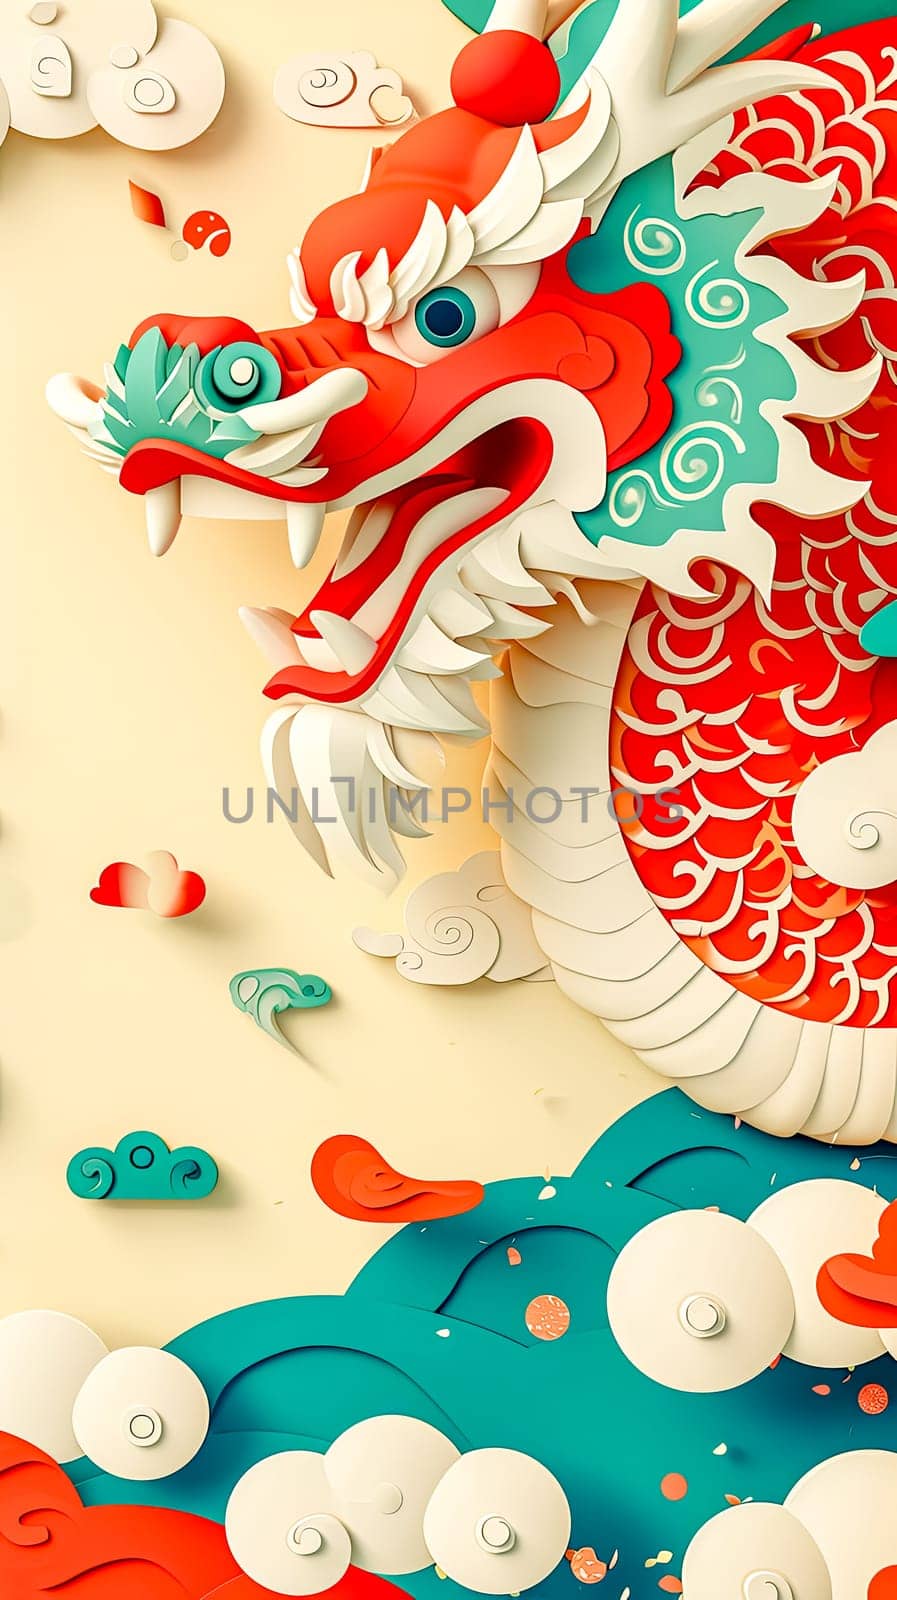 Chinese dragon in bold red and white colors, emerging from rolling teal waves with stylized clouds, against a soft beige background by Edophoto